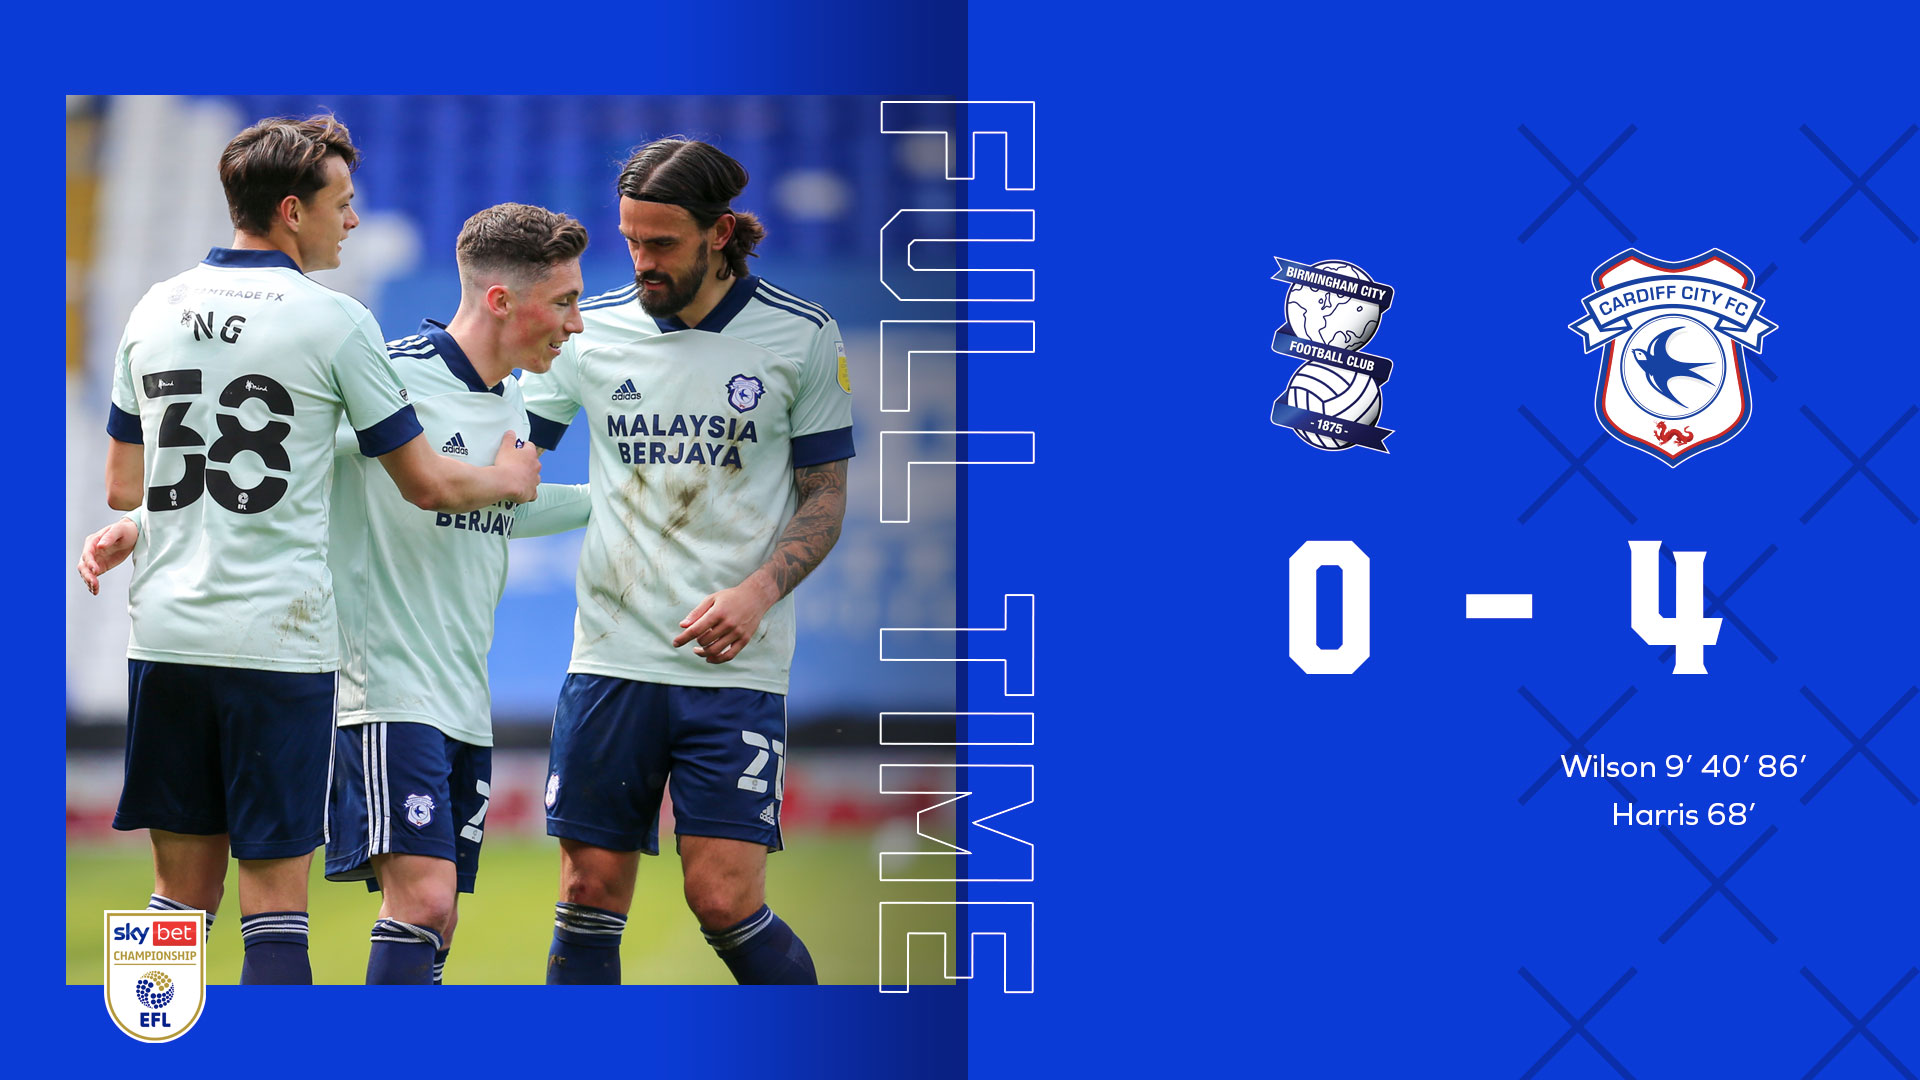 Full-time in the Midlands...